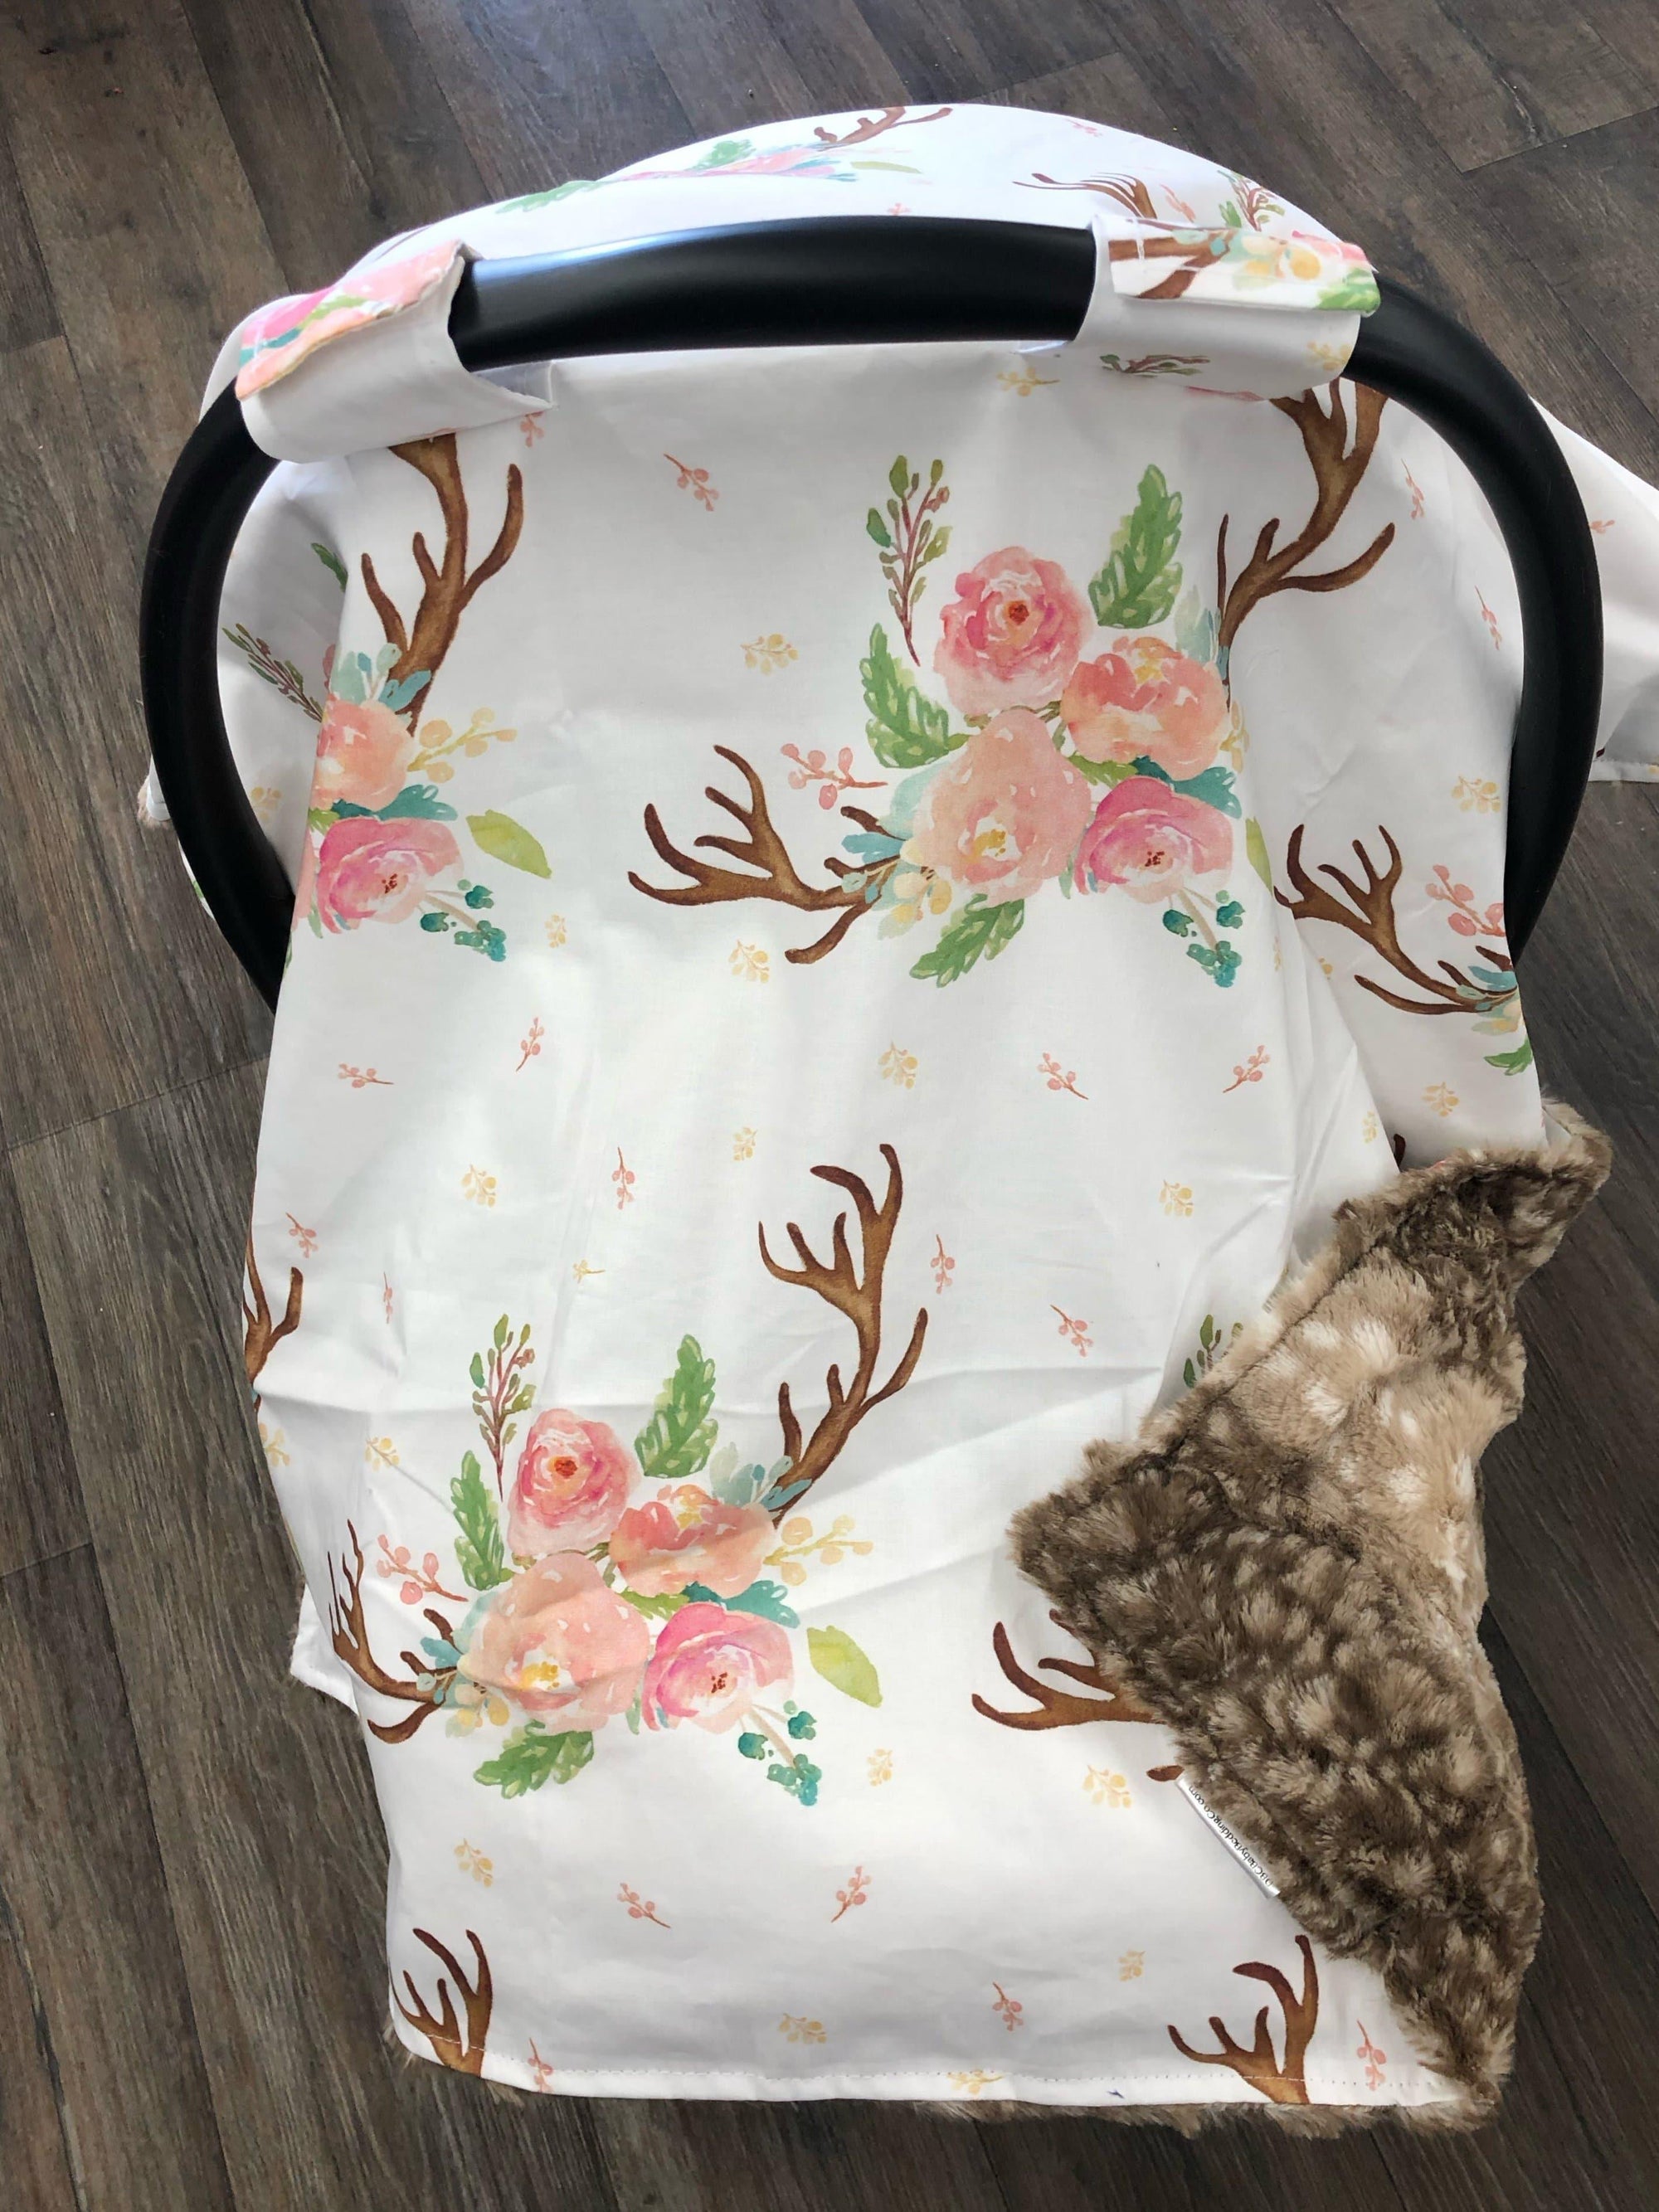 Custom Carseat Tent - Floral Antler Canopy - DBC Baby Bedding Co 